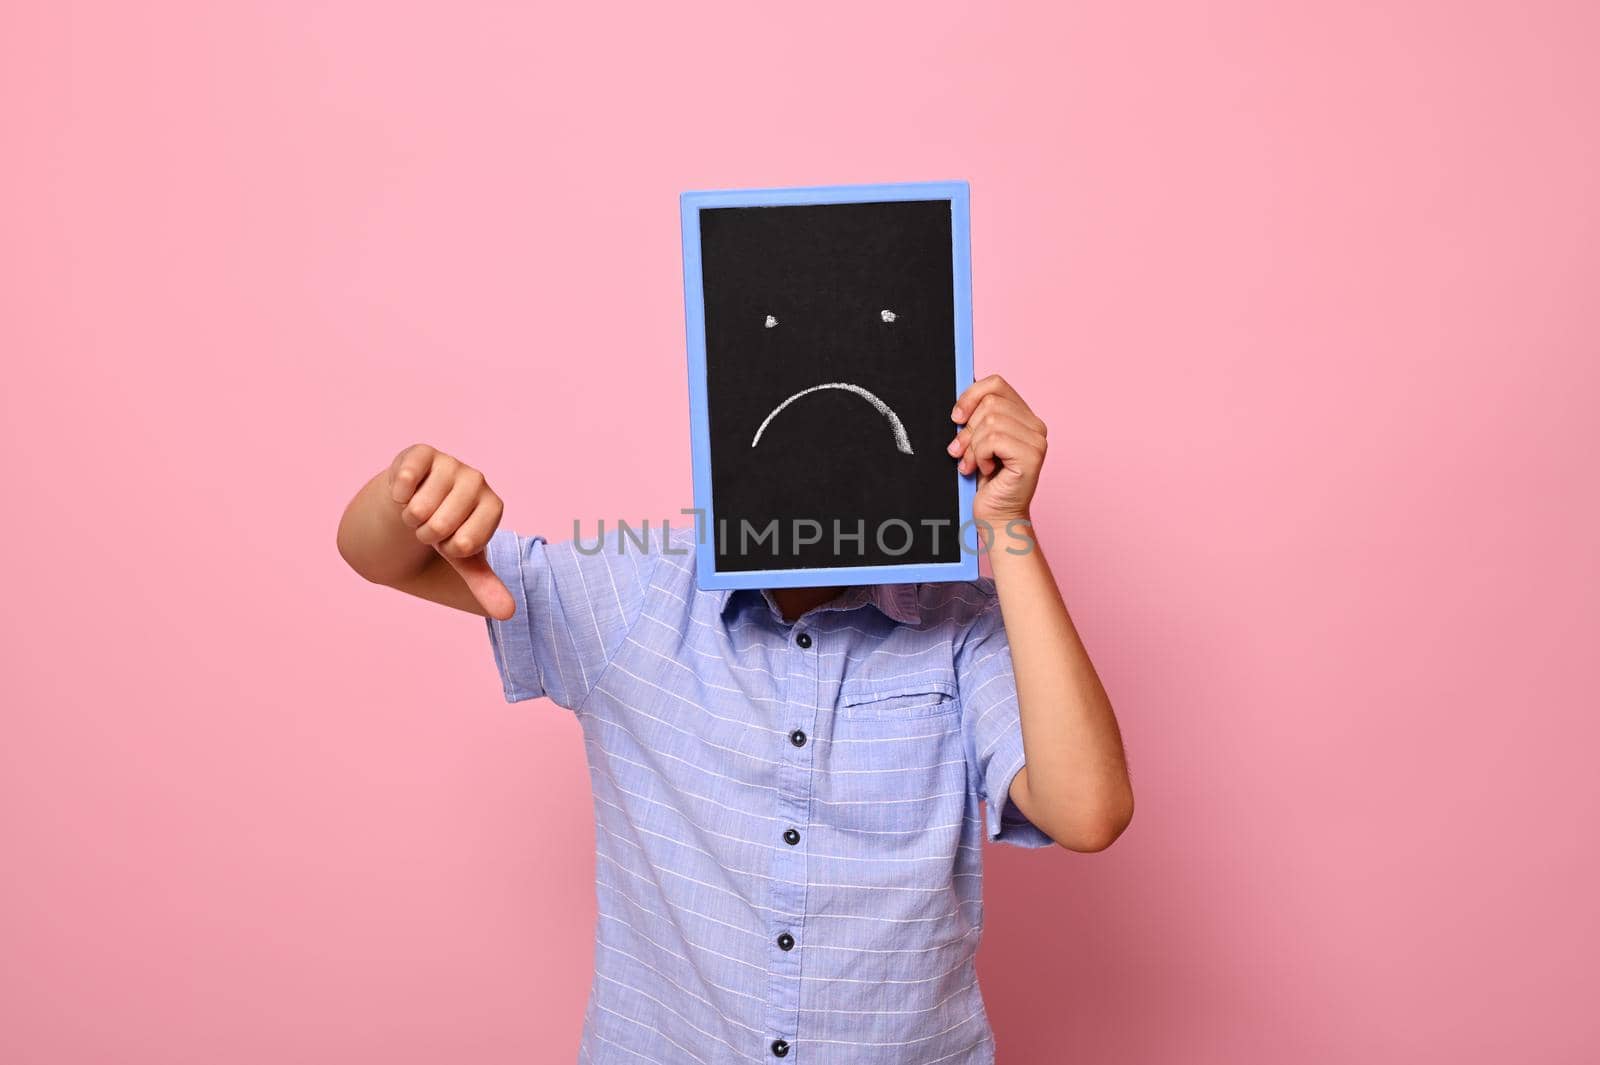 A school boy covers his face with a chalkboard with drawn smiling emoticons, expressing sadness and shows thumb down to the camera. Isolated over pink background with copy space